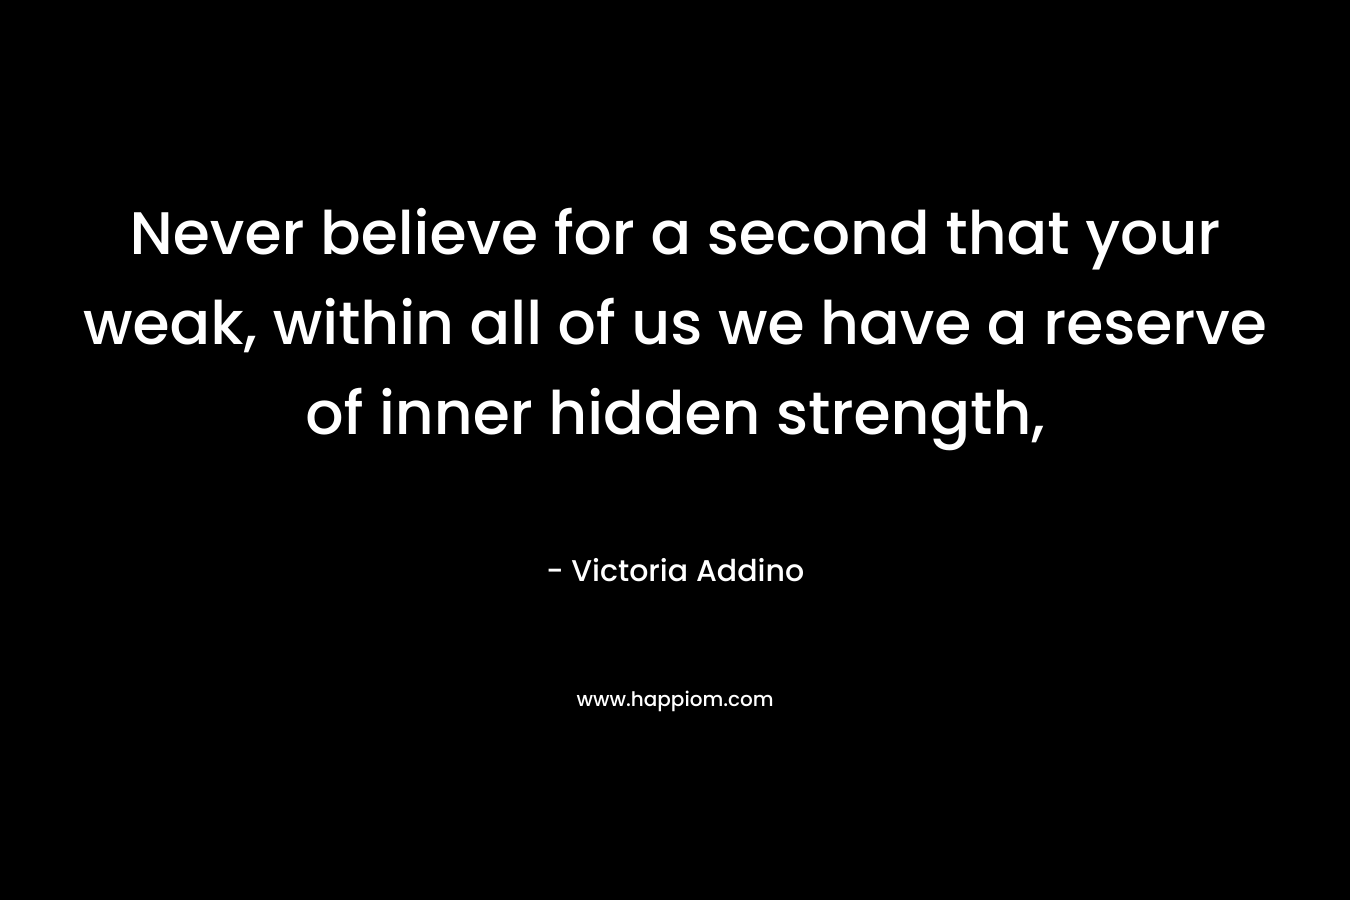 Never believe for a second that your weak, within all of us we have a reserve of inner hidden strength, – Victoria Addino